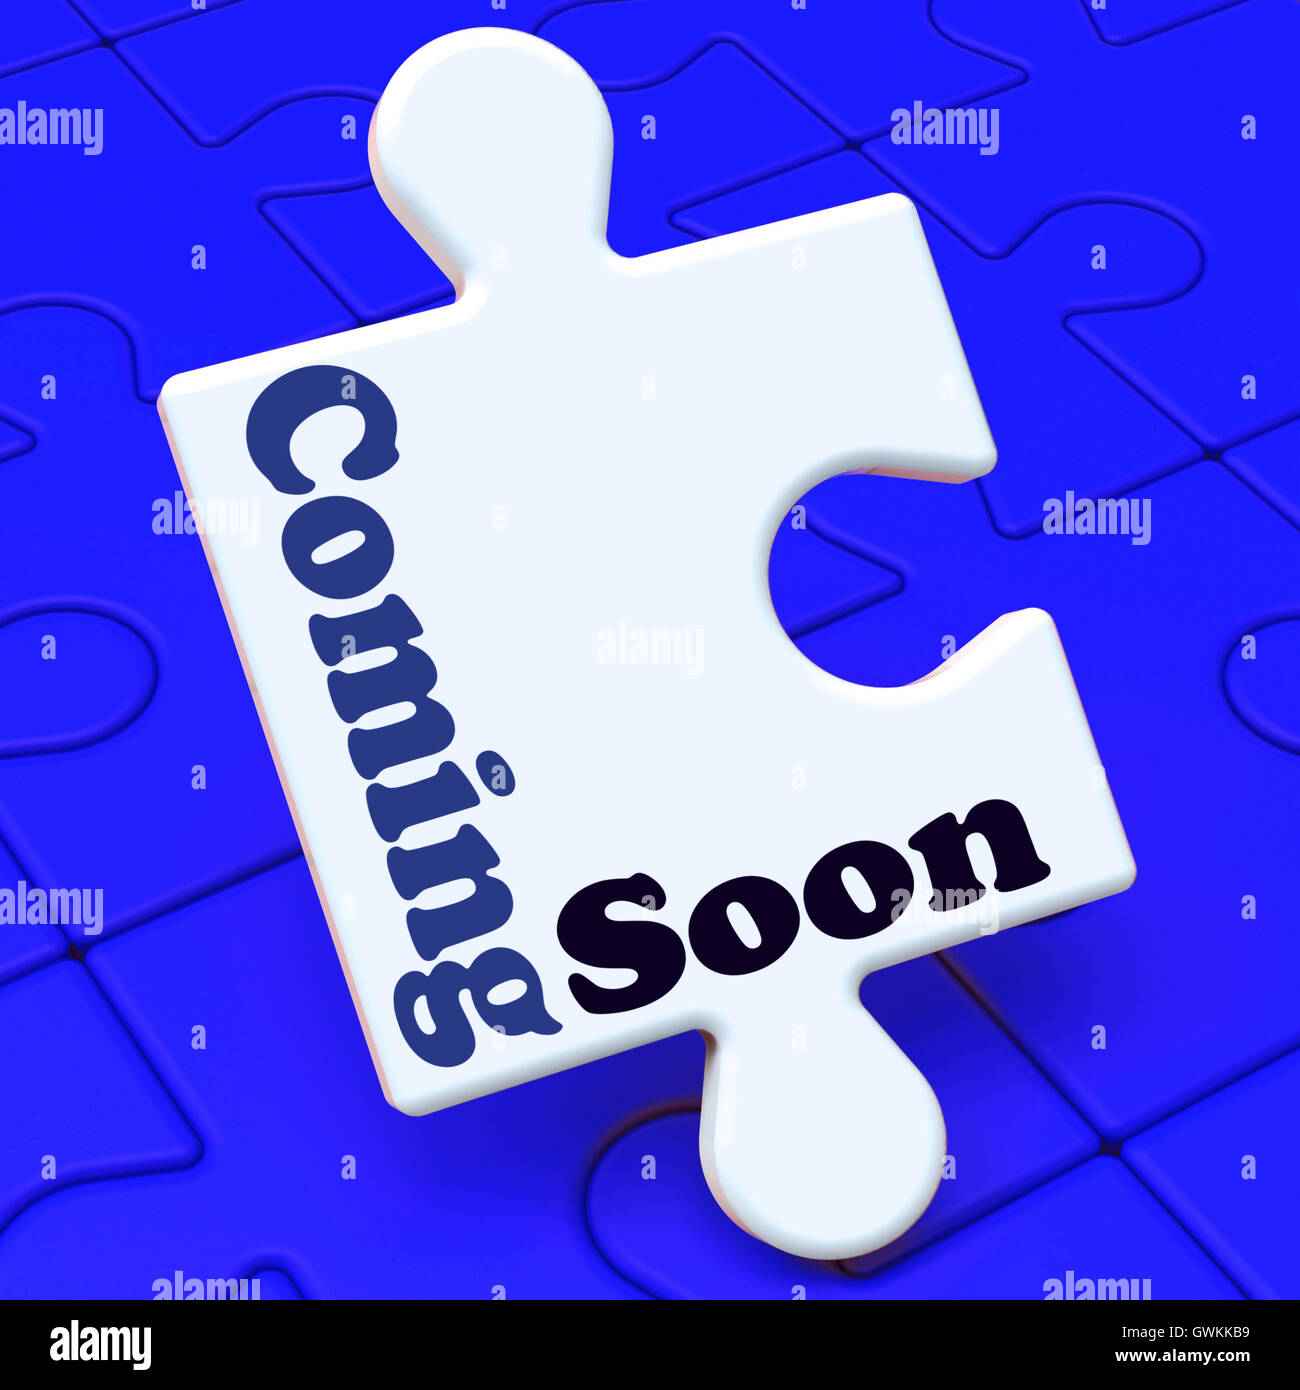 Coming Soon Puzzle Shows New Arrival Or Promotion Product Stock Photo